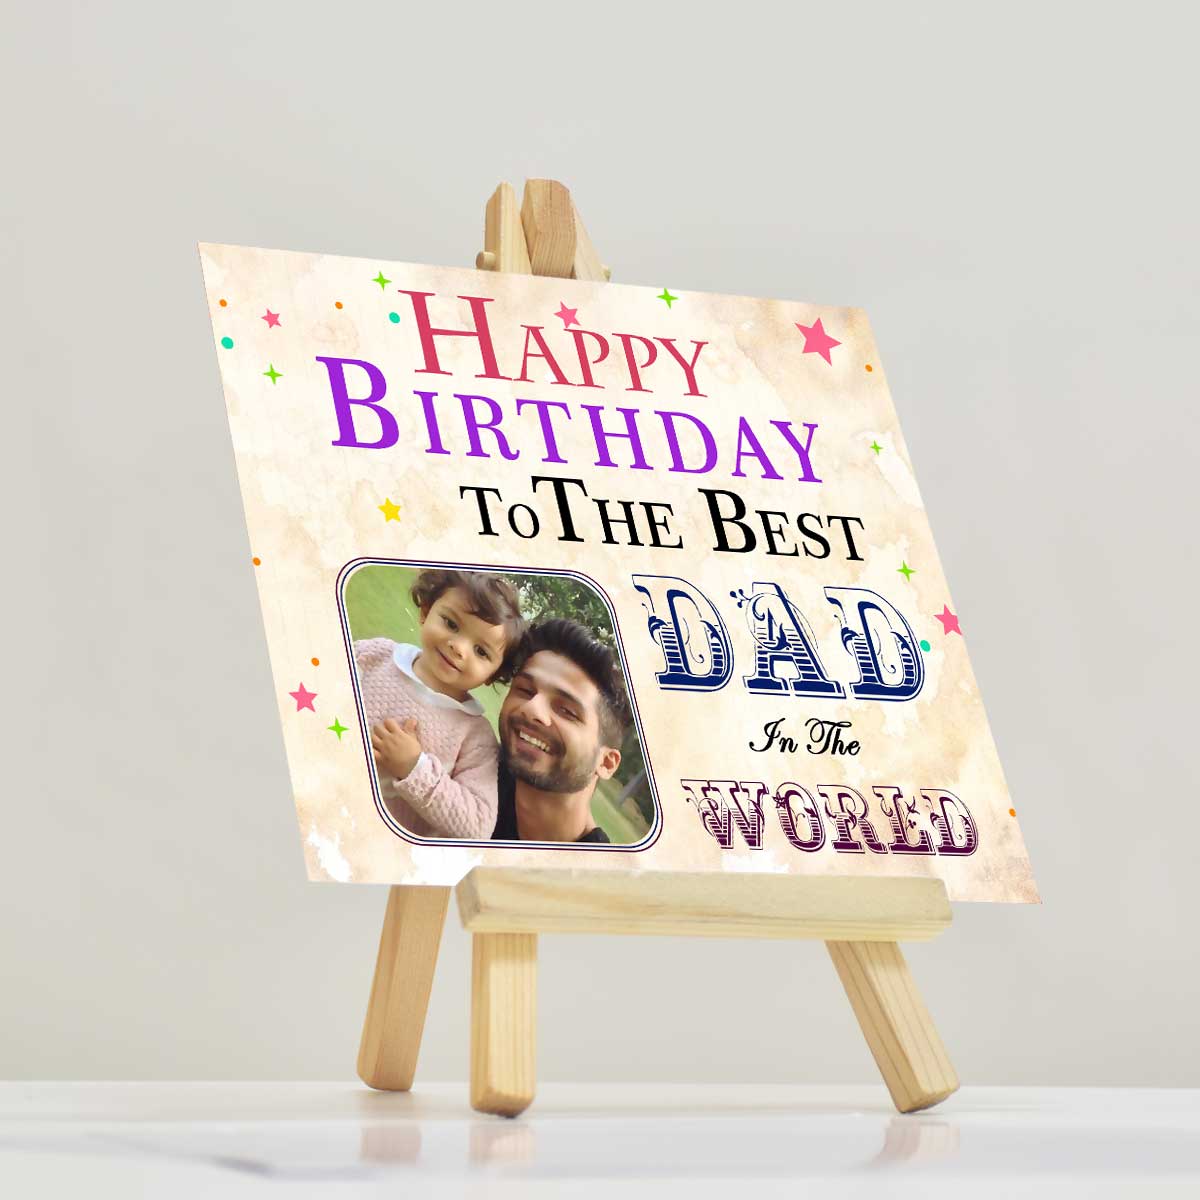 Personalised Best Dad In The World Mini Easel